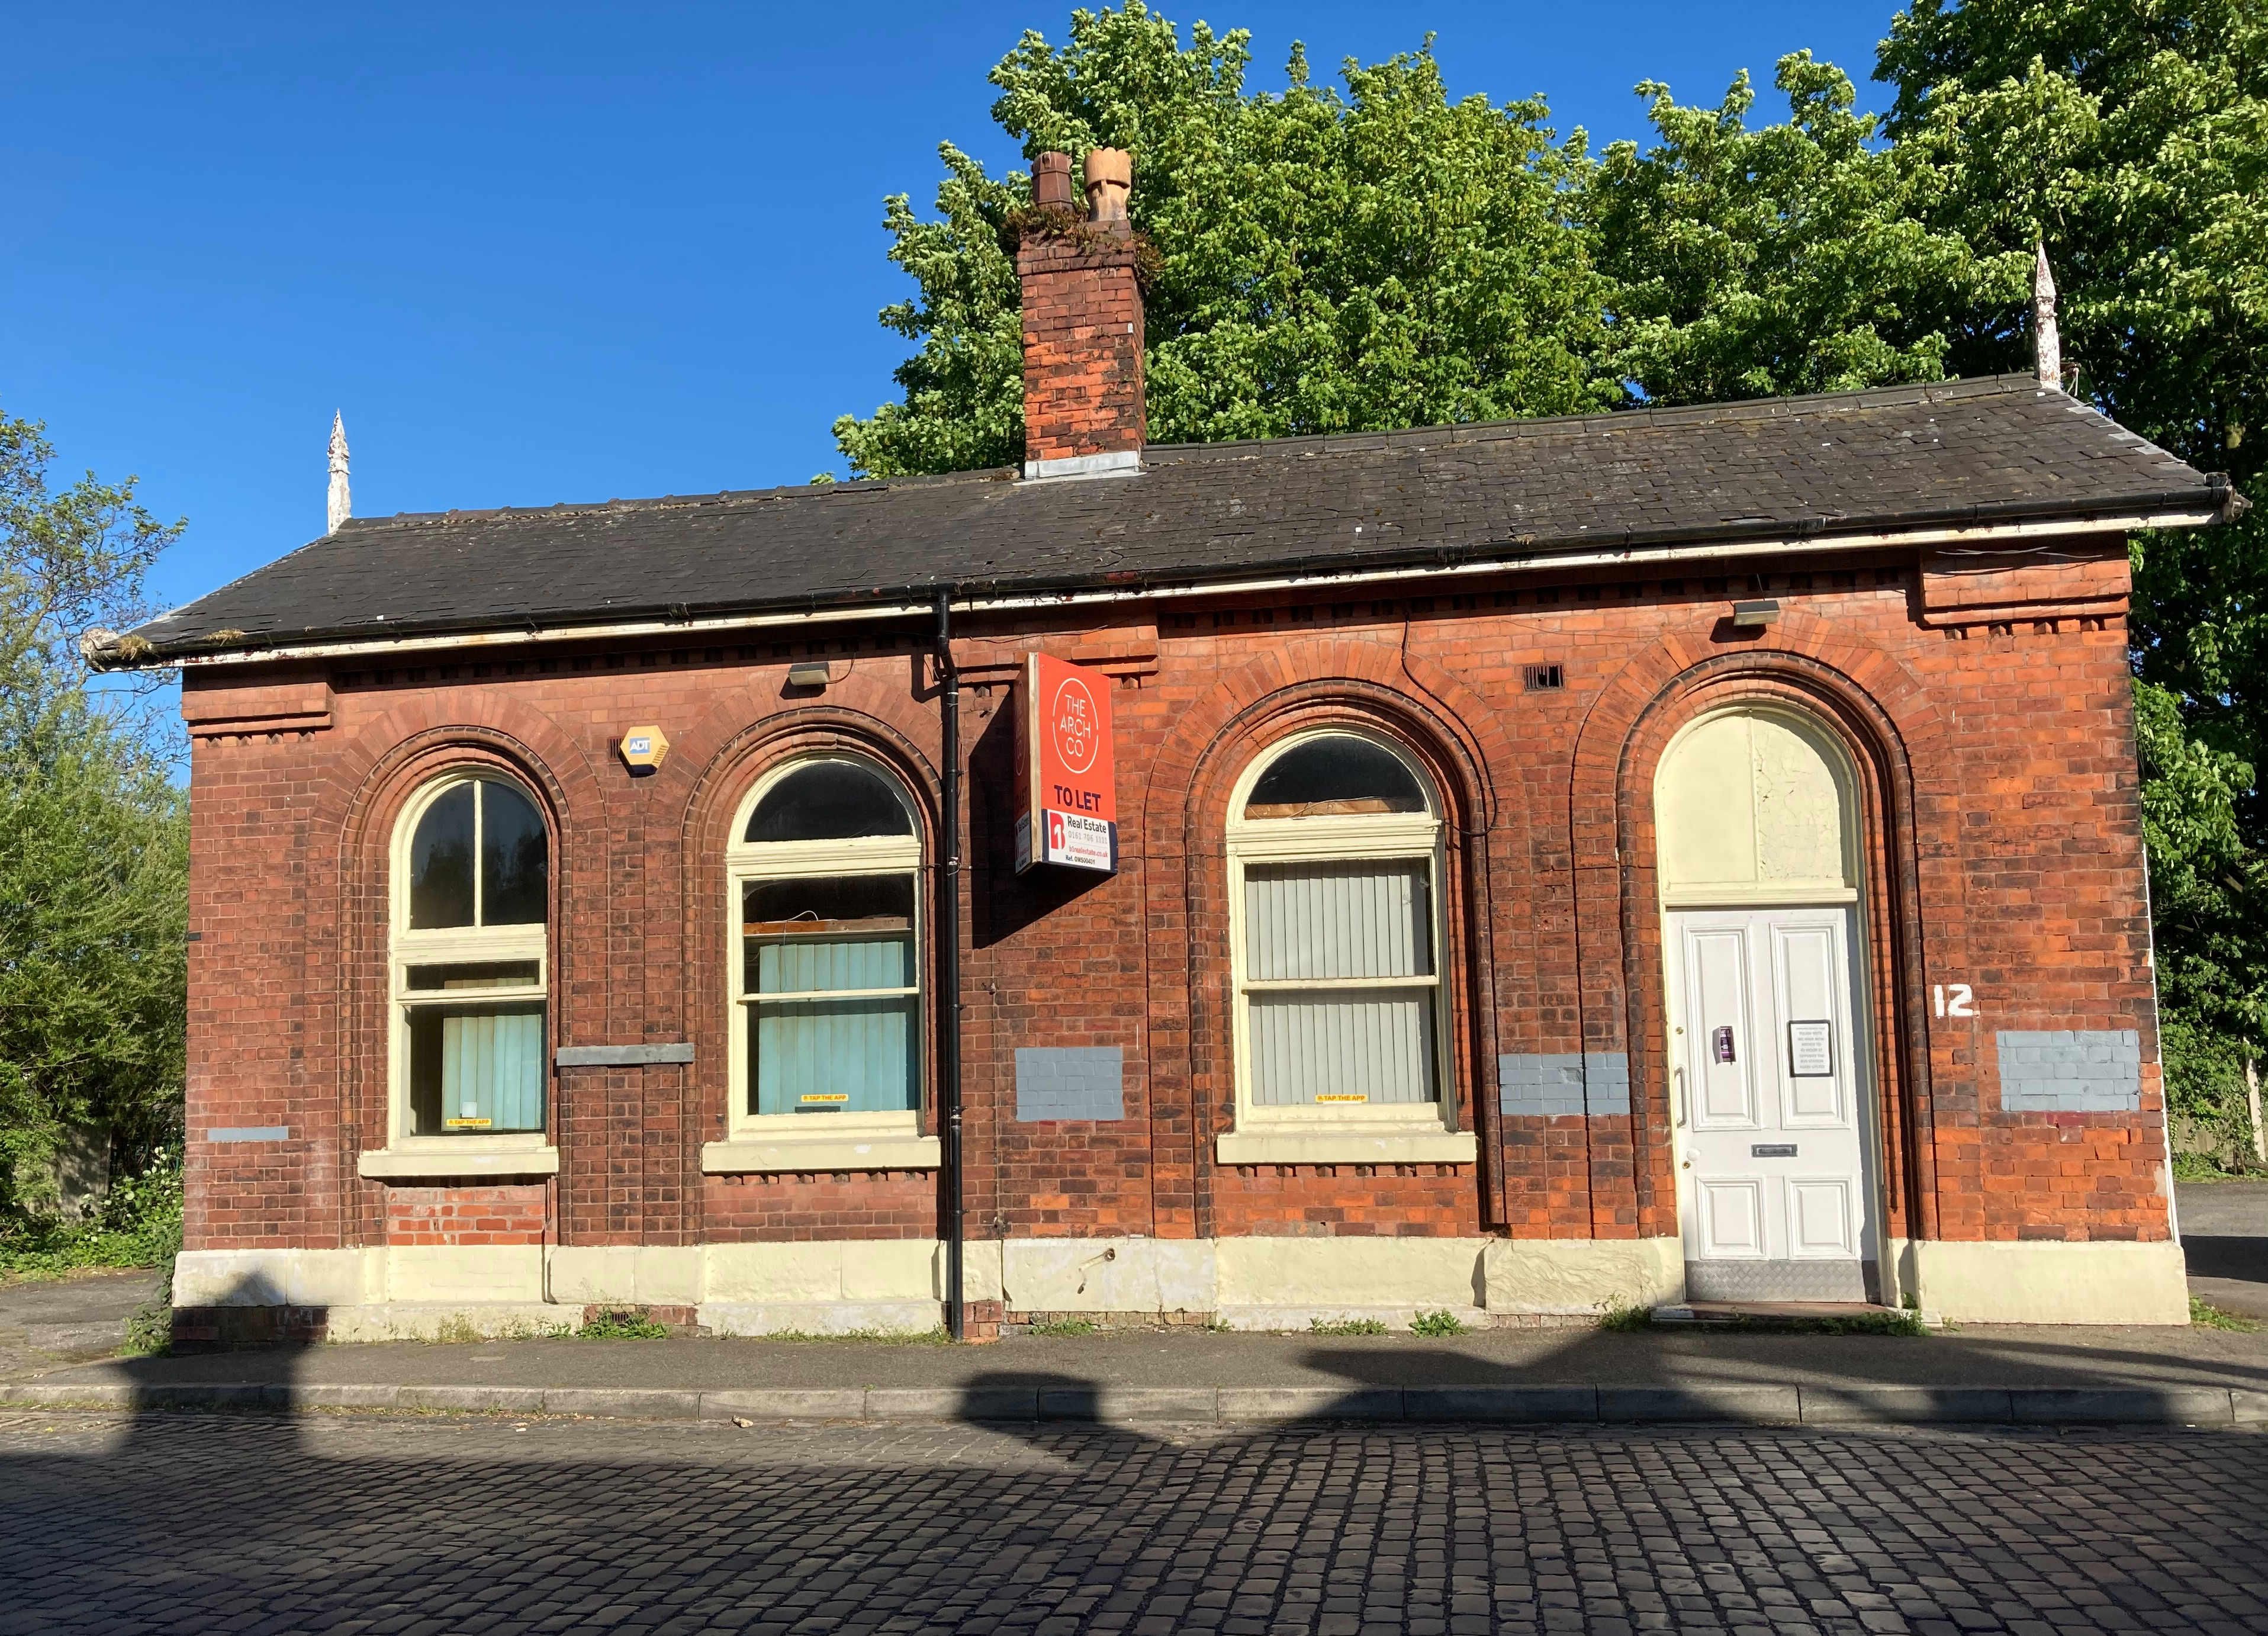 One of the former Ormskirk railway buildings